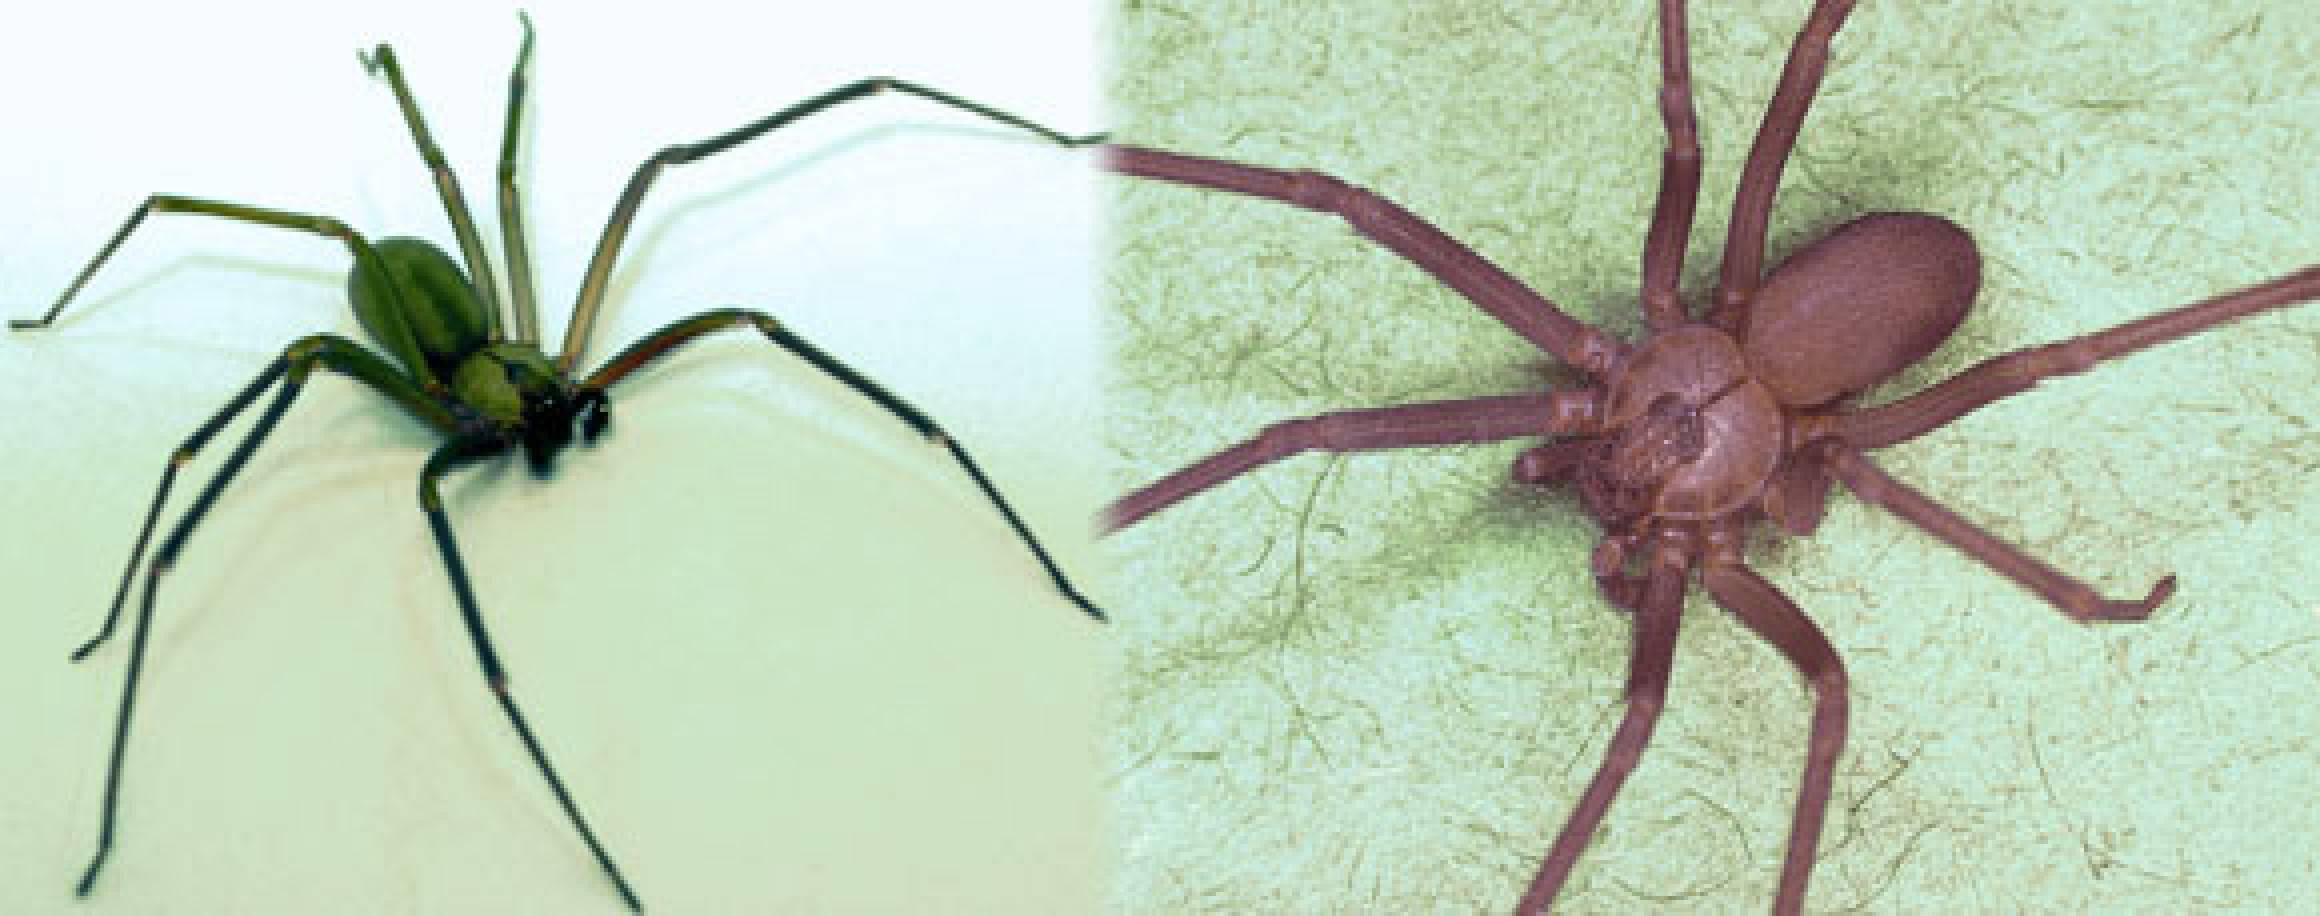 brown recluse pictures